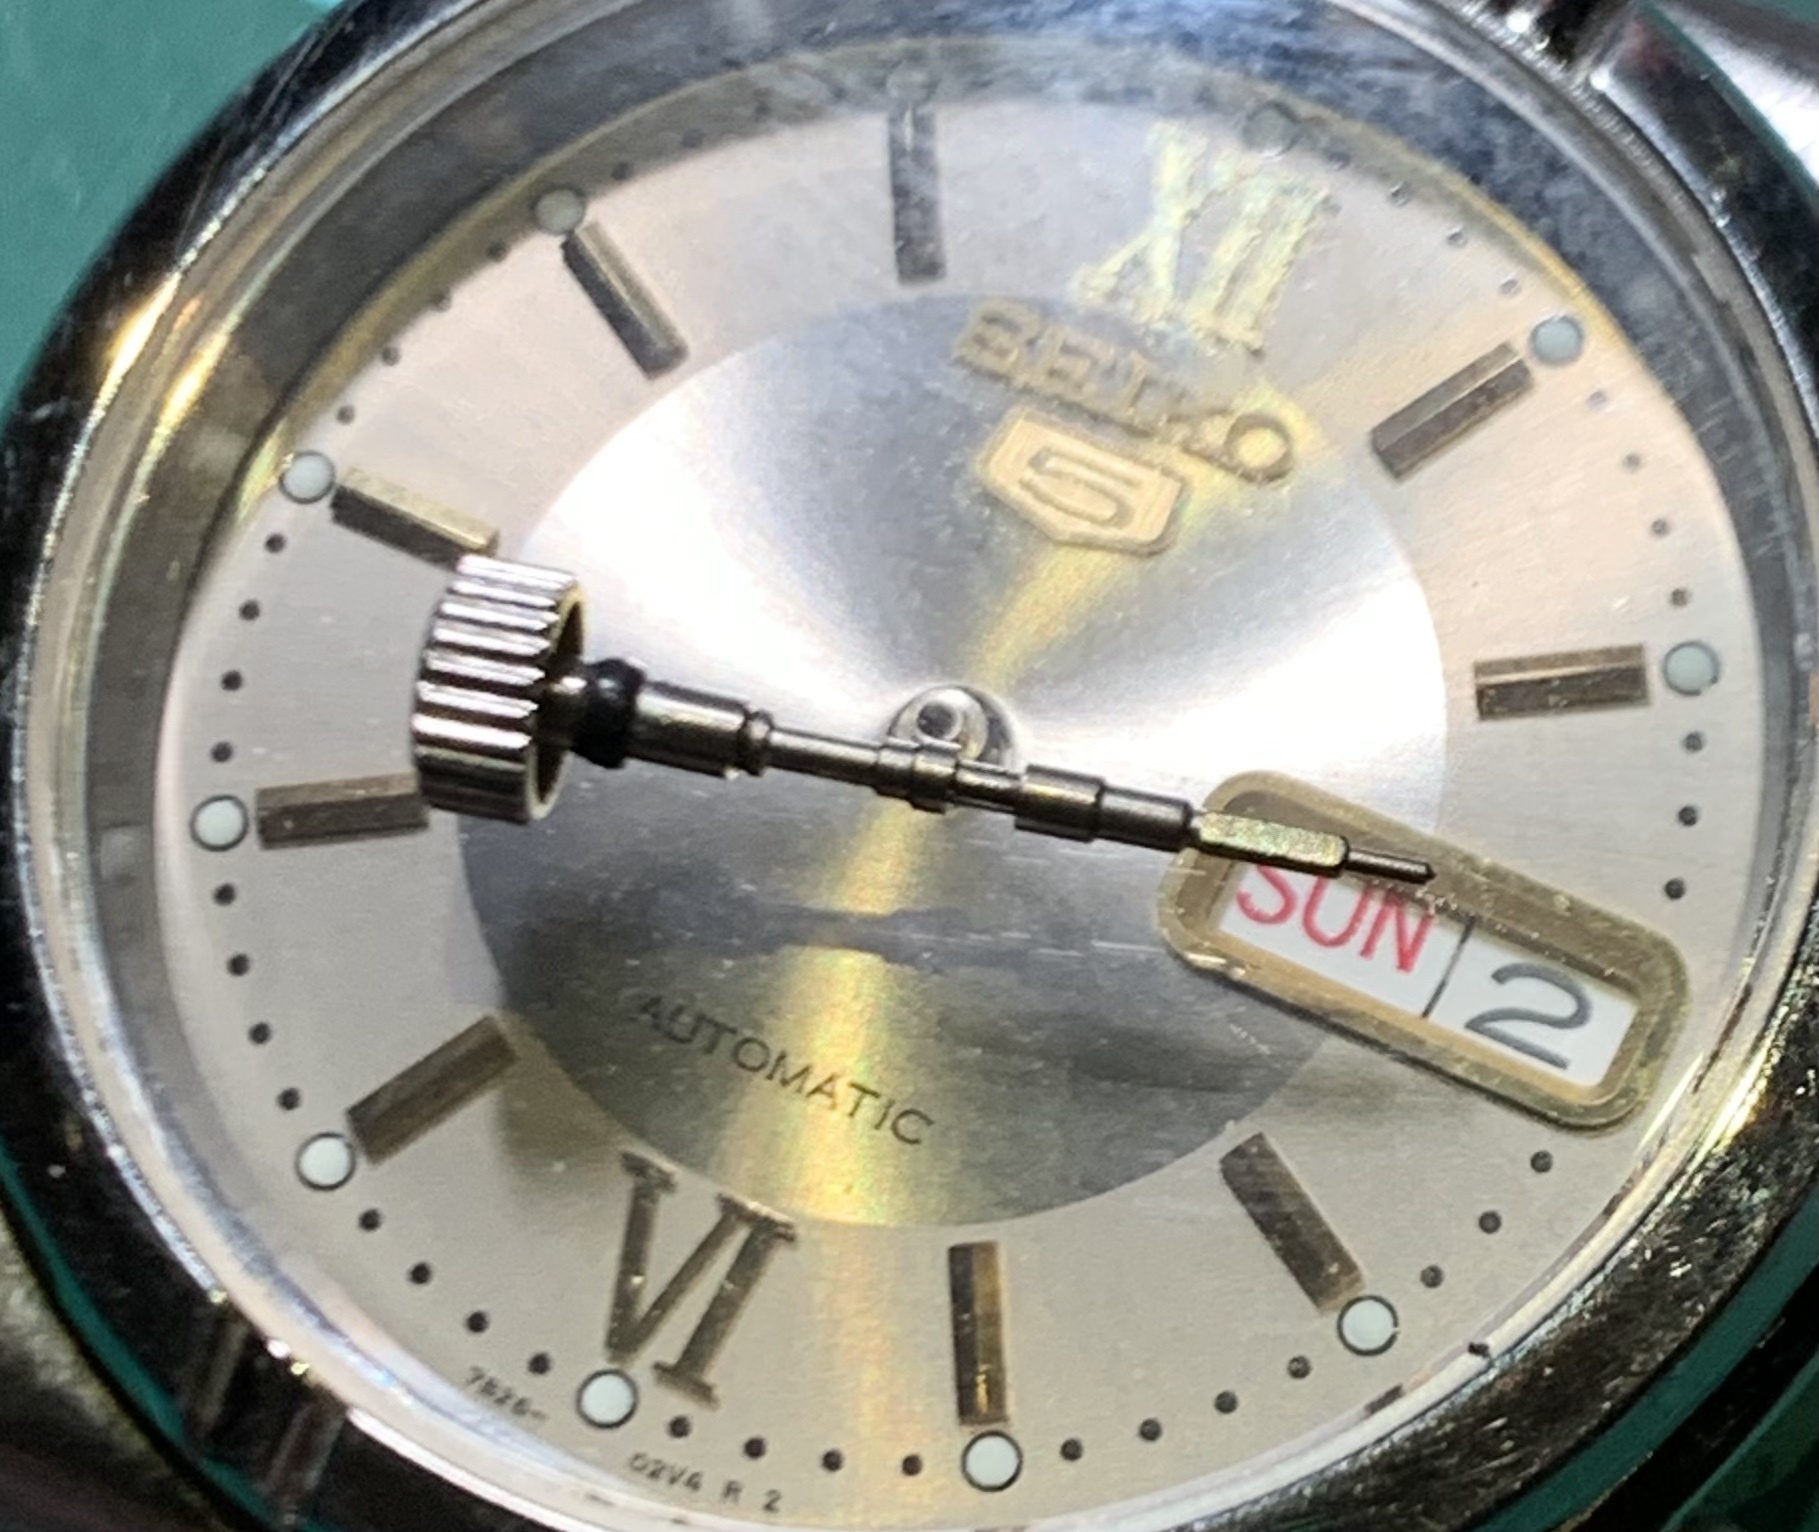 Seiko 7S26 Crown Removal (from stem) - Watch Case Issues, Opening, Movement/ Stem Removal, Case Parts, straps and bracelets - Watch Repair Talk